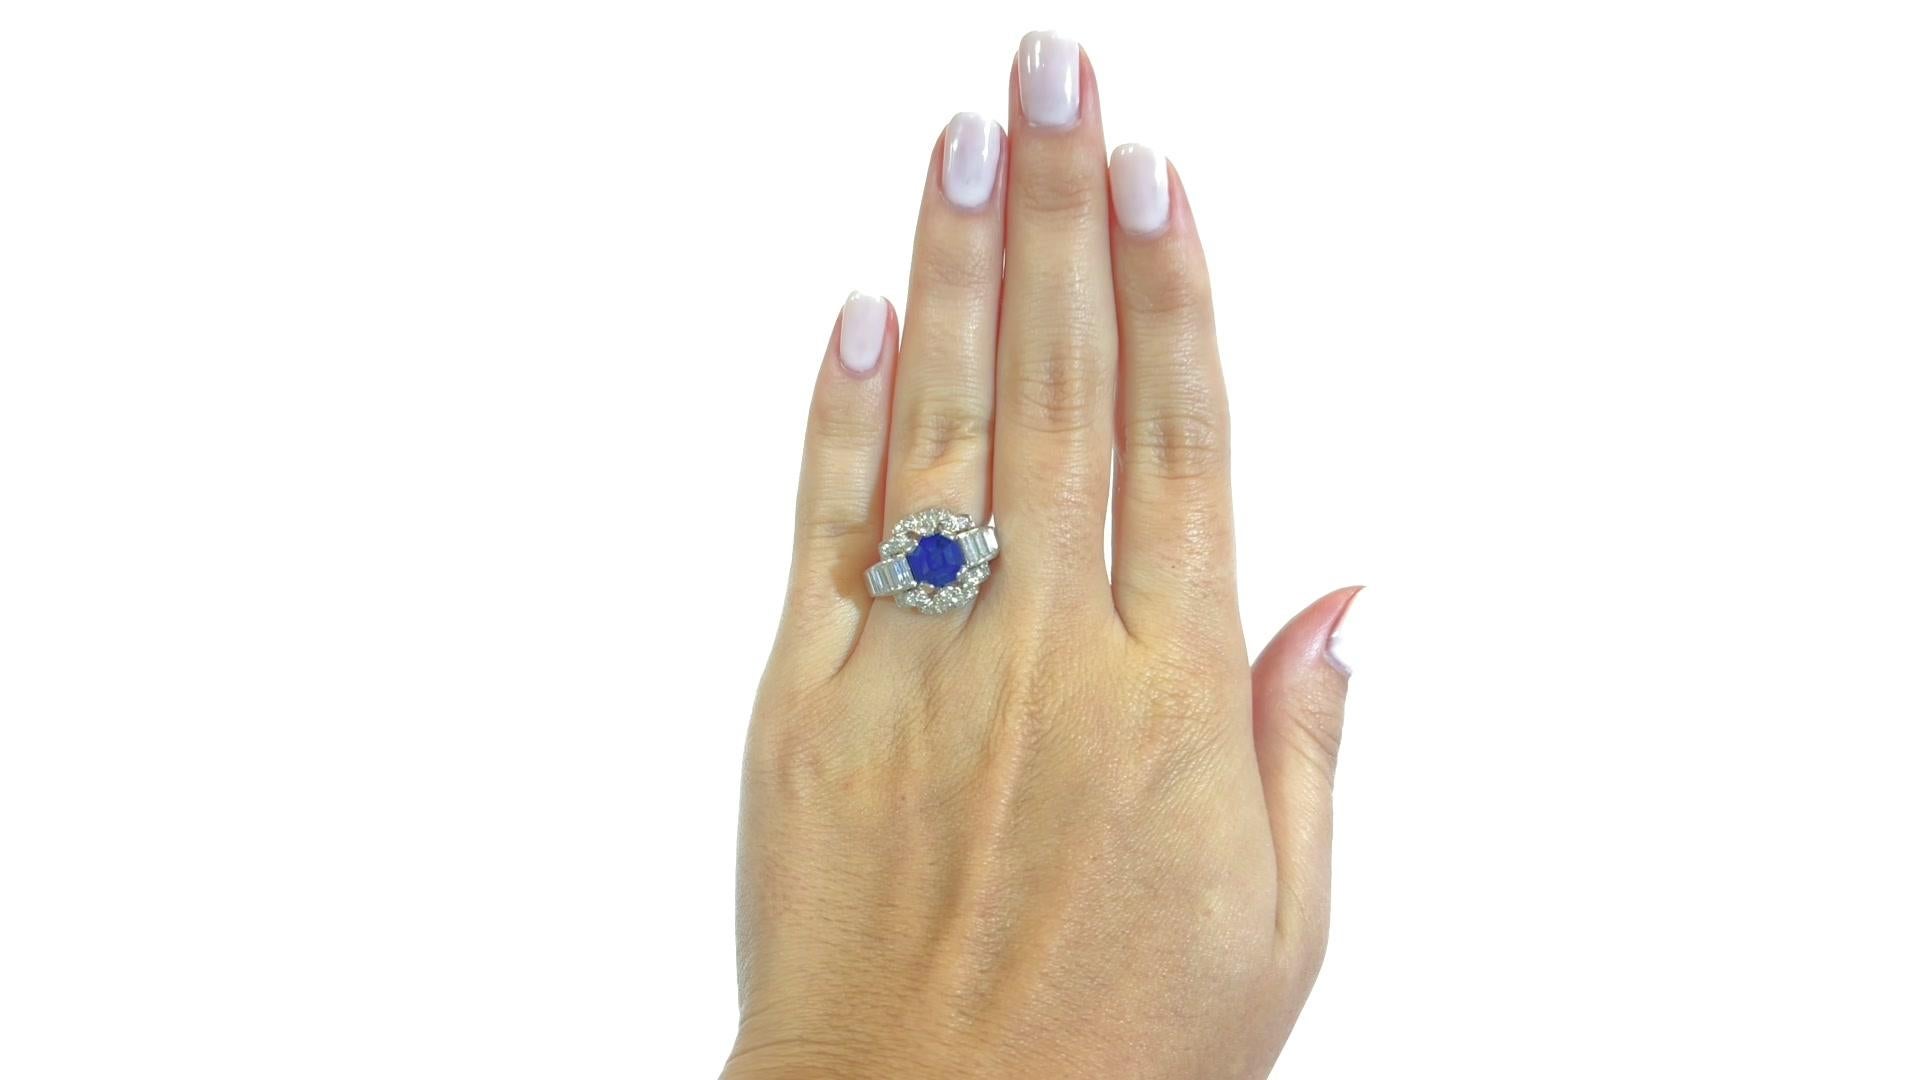 If you are looking for a one-of-a-kind color stone ring, consider this stunning Retro Sapphire Diamond Platinum Ring. The intricate features and mixed shapes will constantly attract your gaze. You will own a sapphire ring like no other. 

The center